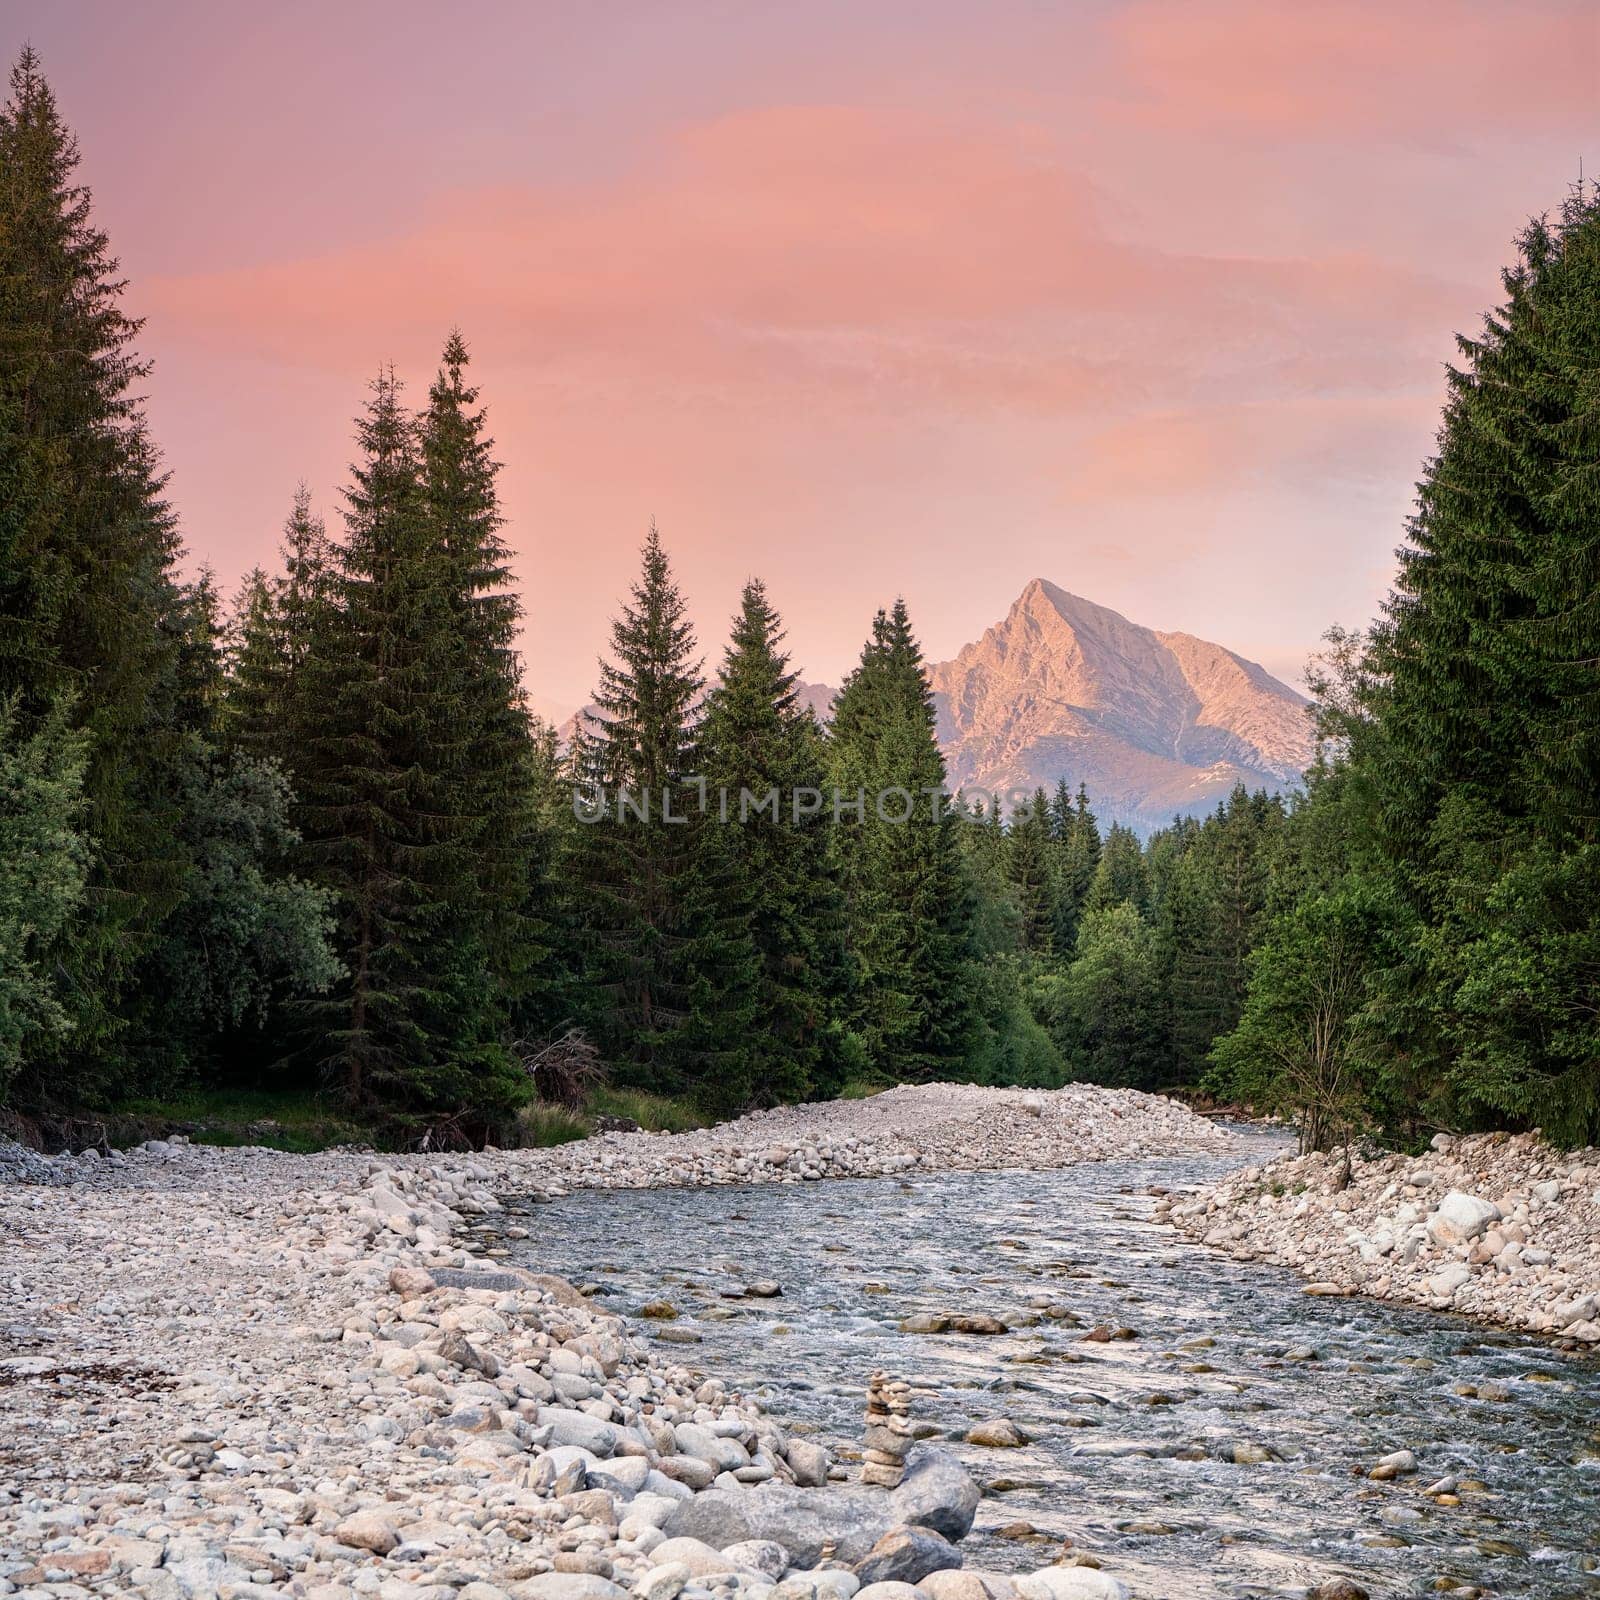 Forest river flowing, coniferous trees on both sides, mount Krivan peak (Slovak symbol) with pink / red clouds above in distance